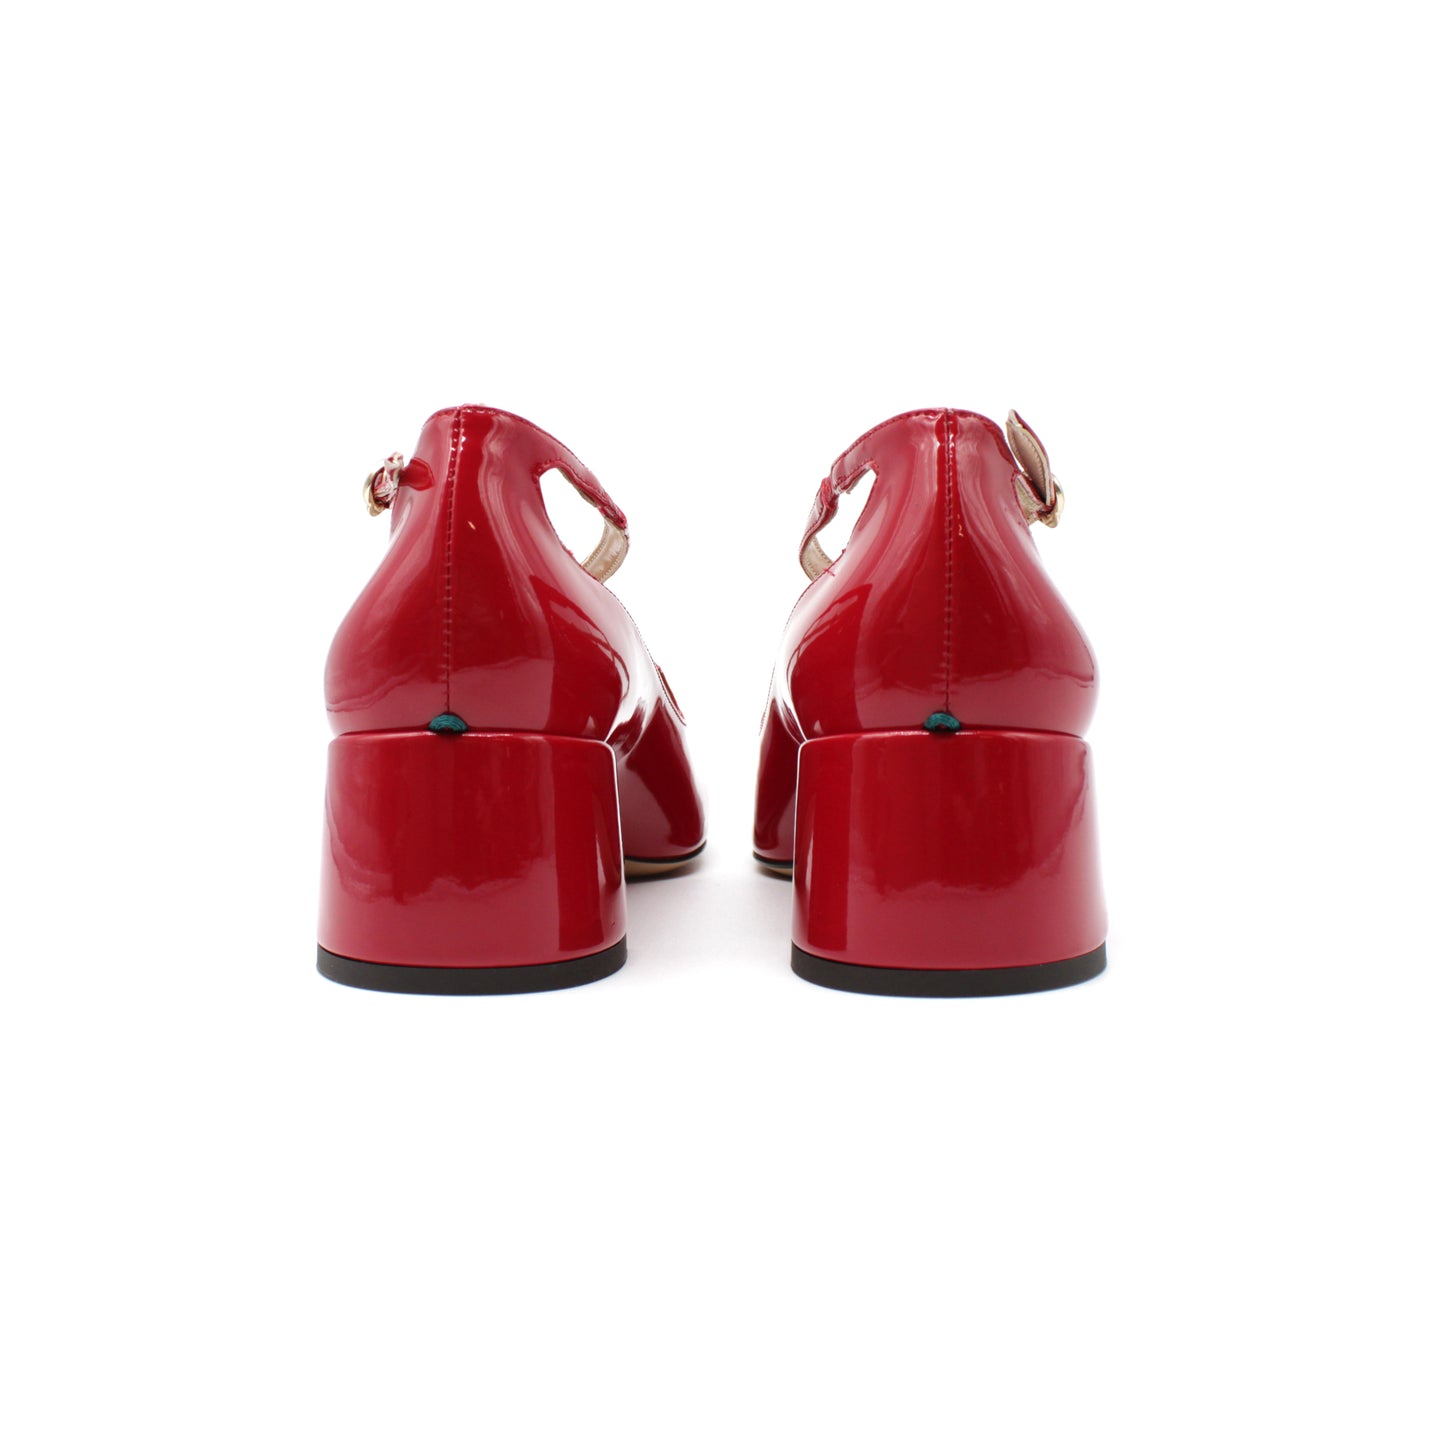 Pump Two for Love in red patent leather - VEGAN